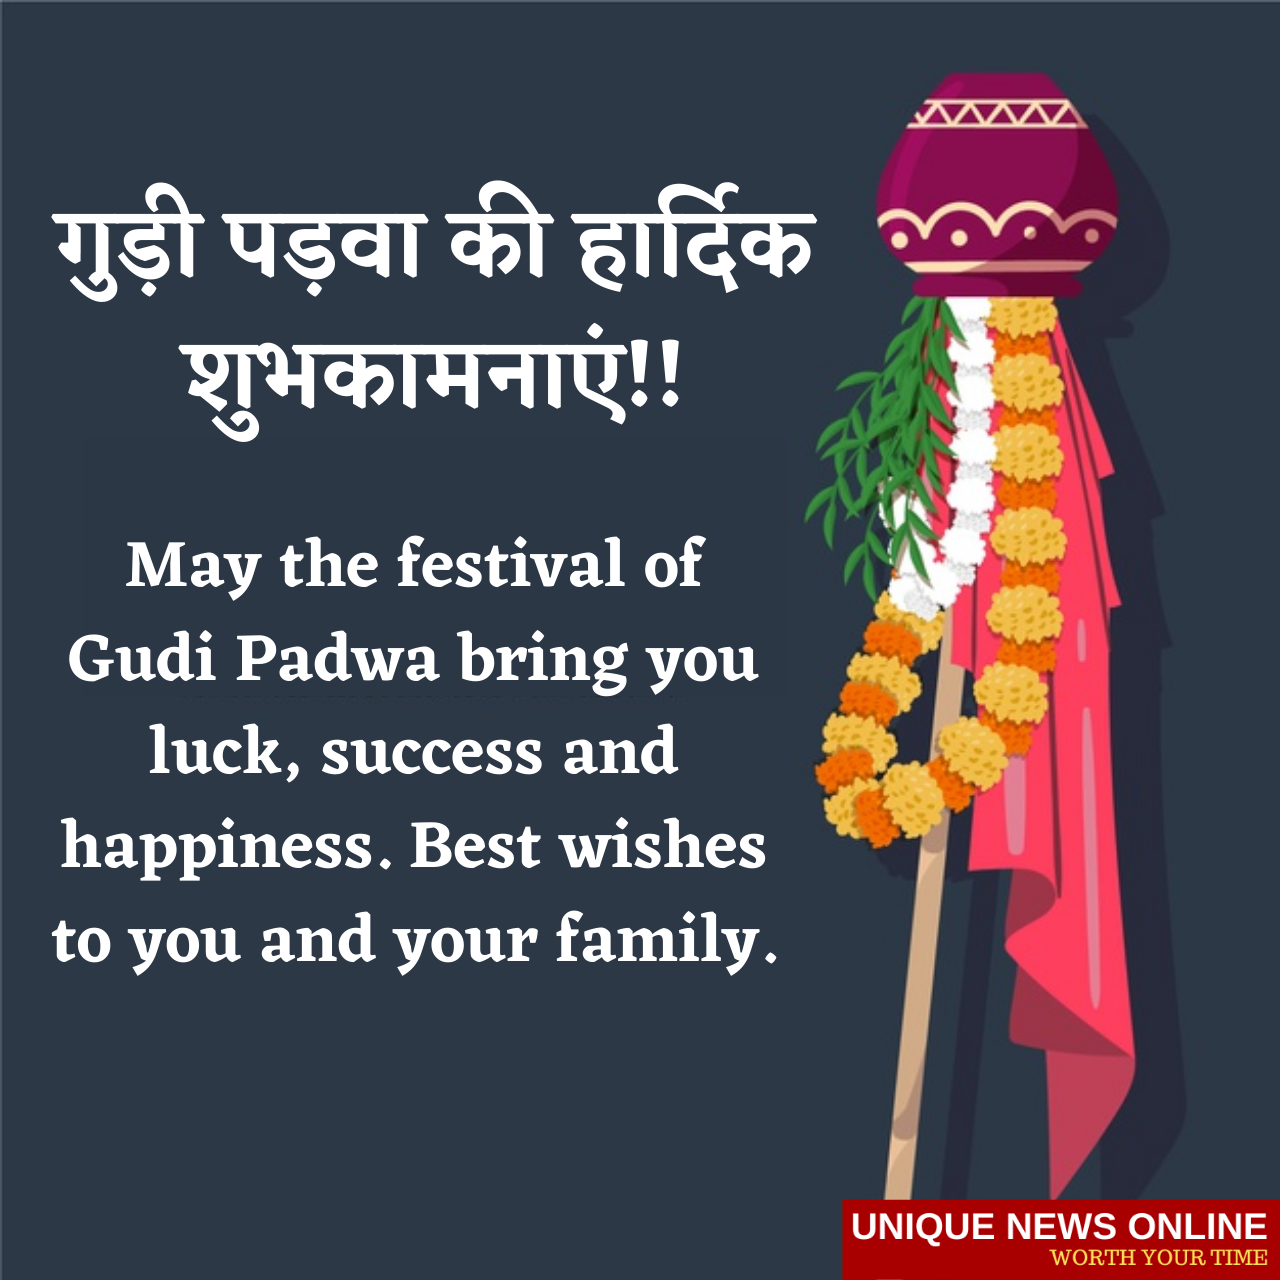 Happy Gudi Padwa 2021 Wishes in Hindi Messages, Greetings, and Quotes to Share on Marathi New Year